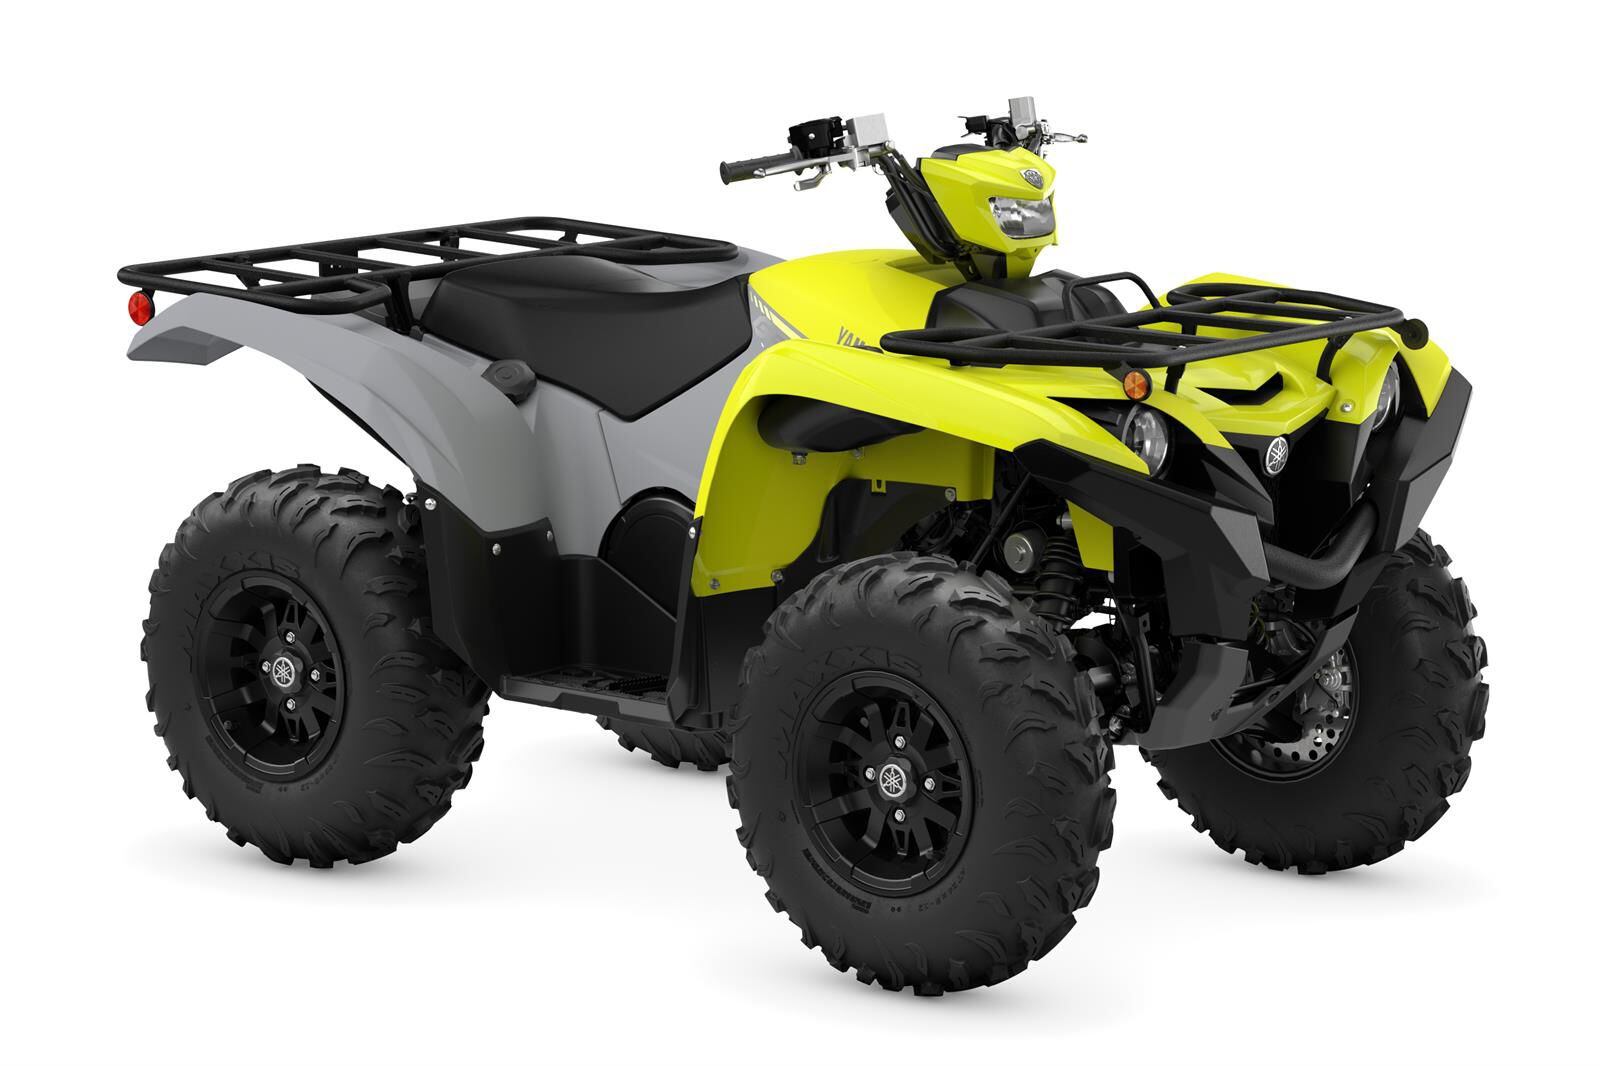 The 2022 Yamaha Grizzly EPS comes in Armor Gray and Yellow.